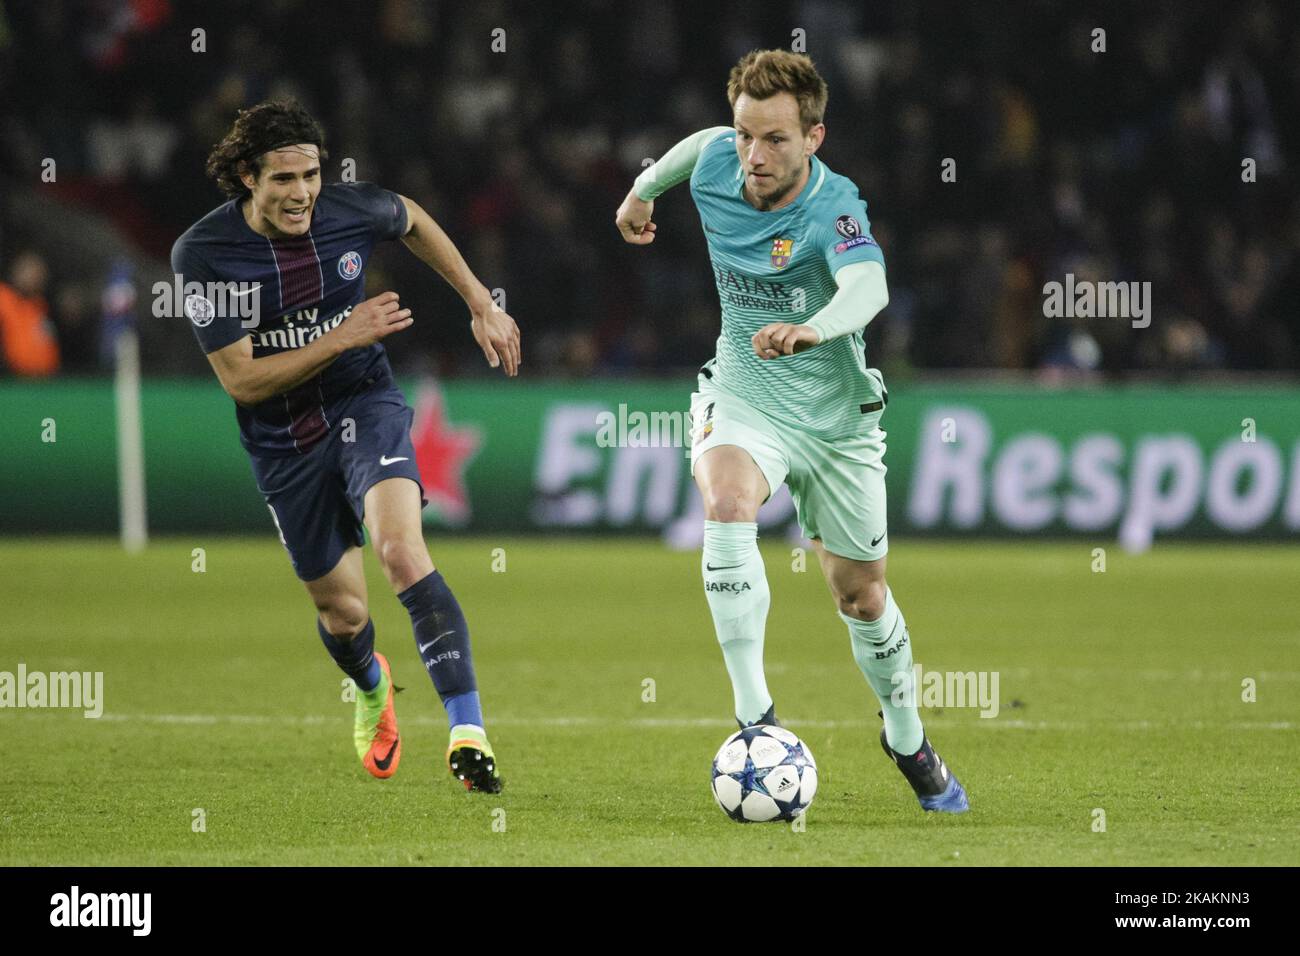 FC Barcelona player Ivan Rakitic (R) vies with PSG Edinson Cavani (L) during the UEFA Champions League round of 16 first leg football match between Paris Saint-Germain and FC Barcelona on February 14, 2017 at the Parc des Princes stadium in Paris. (Photo by Geoffroy Van der Hasselt/NurPhoto) *** Please Use Credit from Credit Field *** Stock Photo